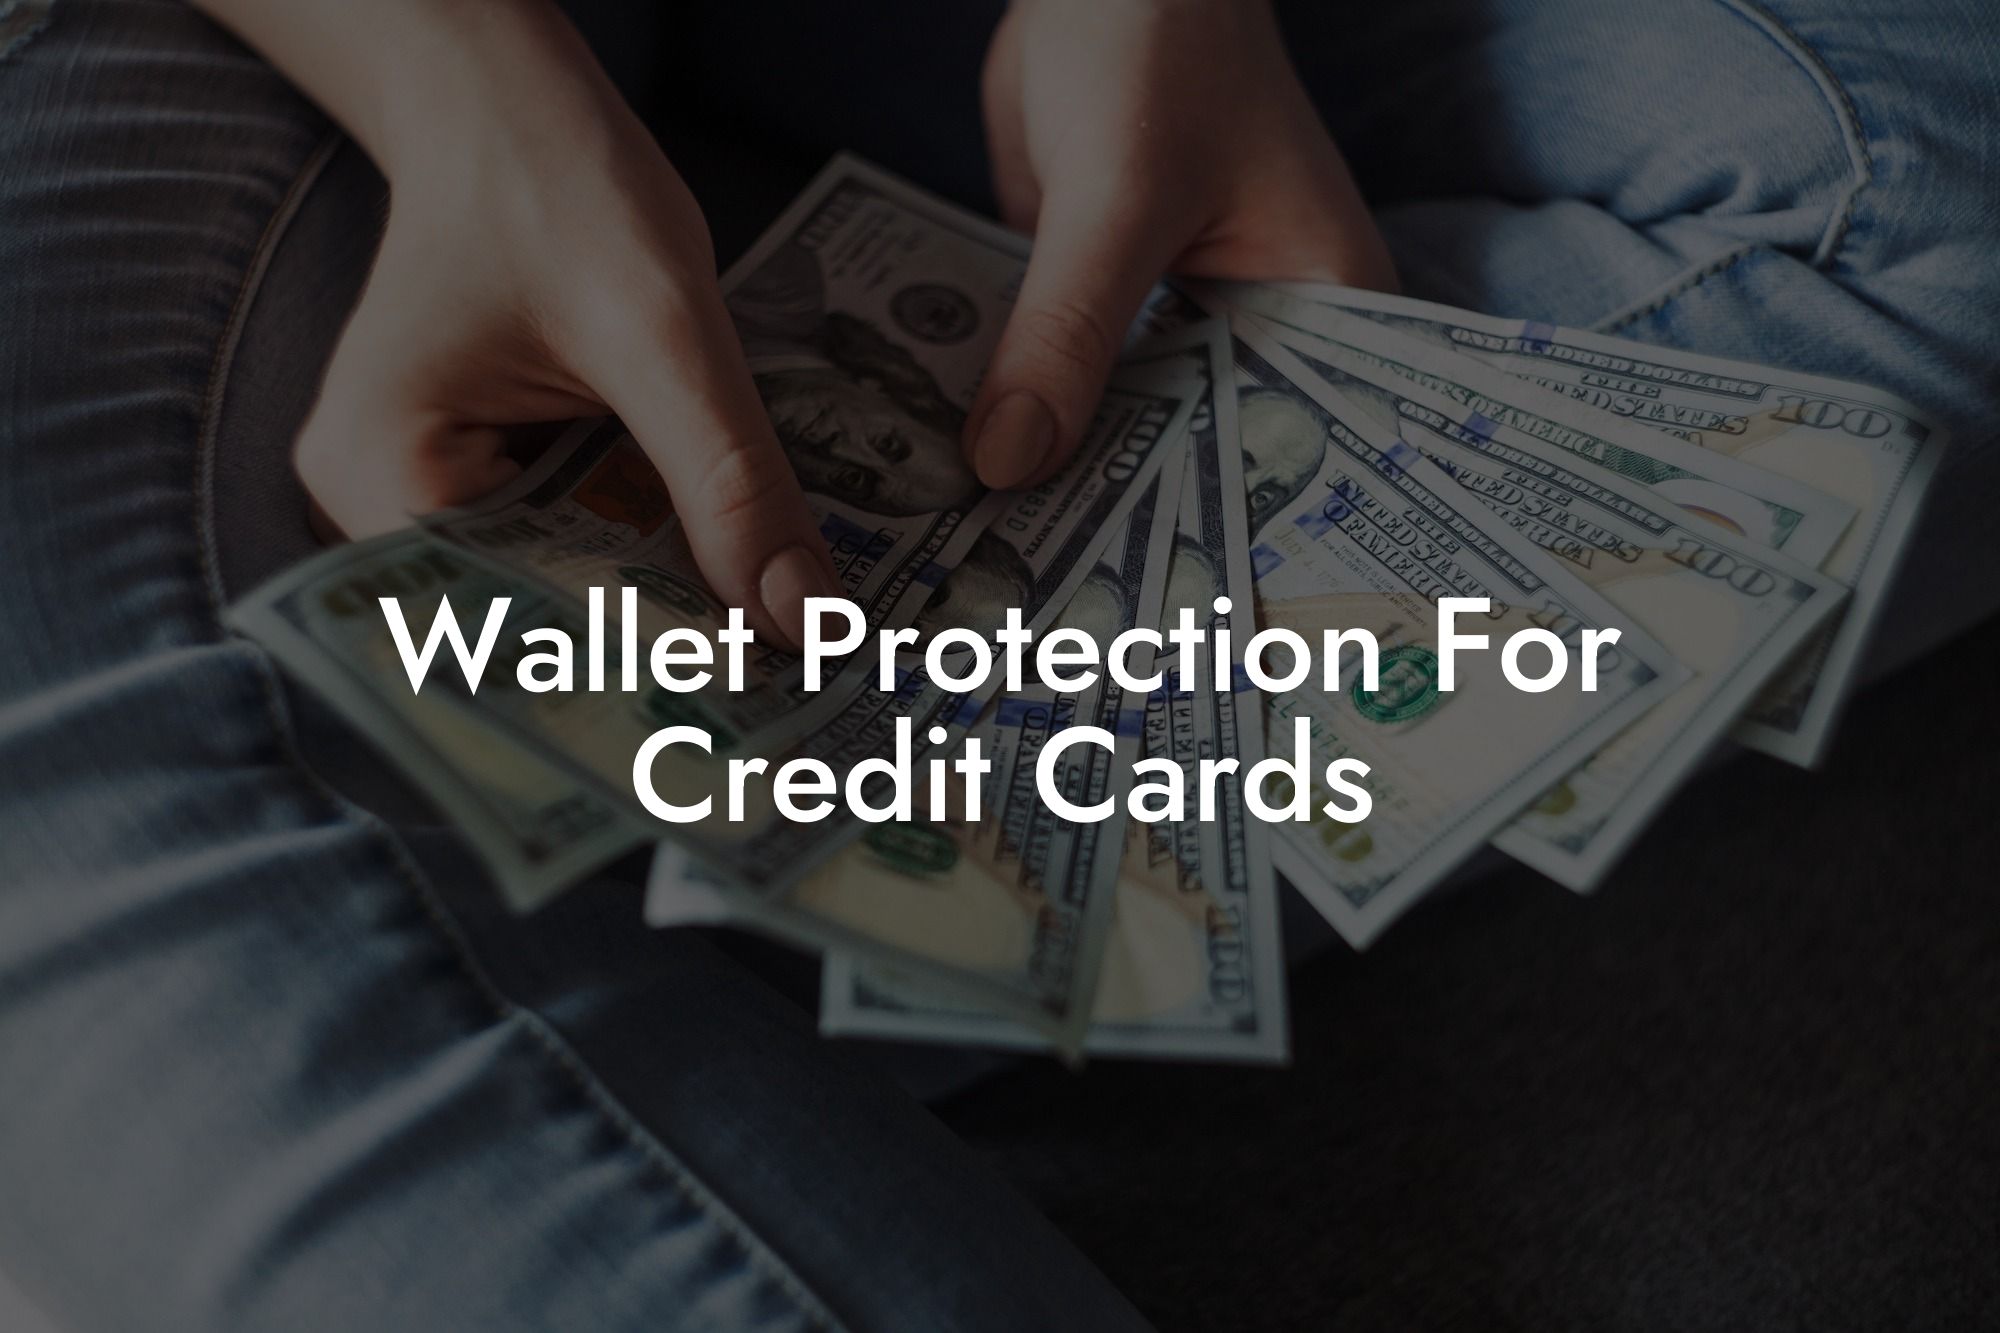 Wallet Protection For Credit Cards